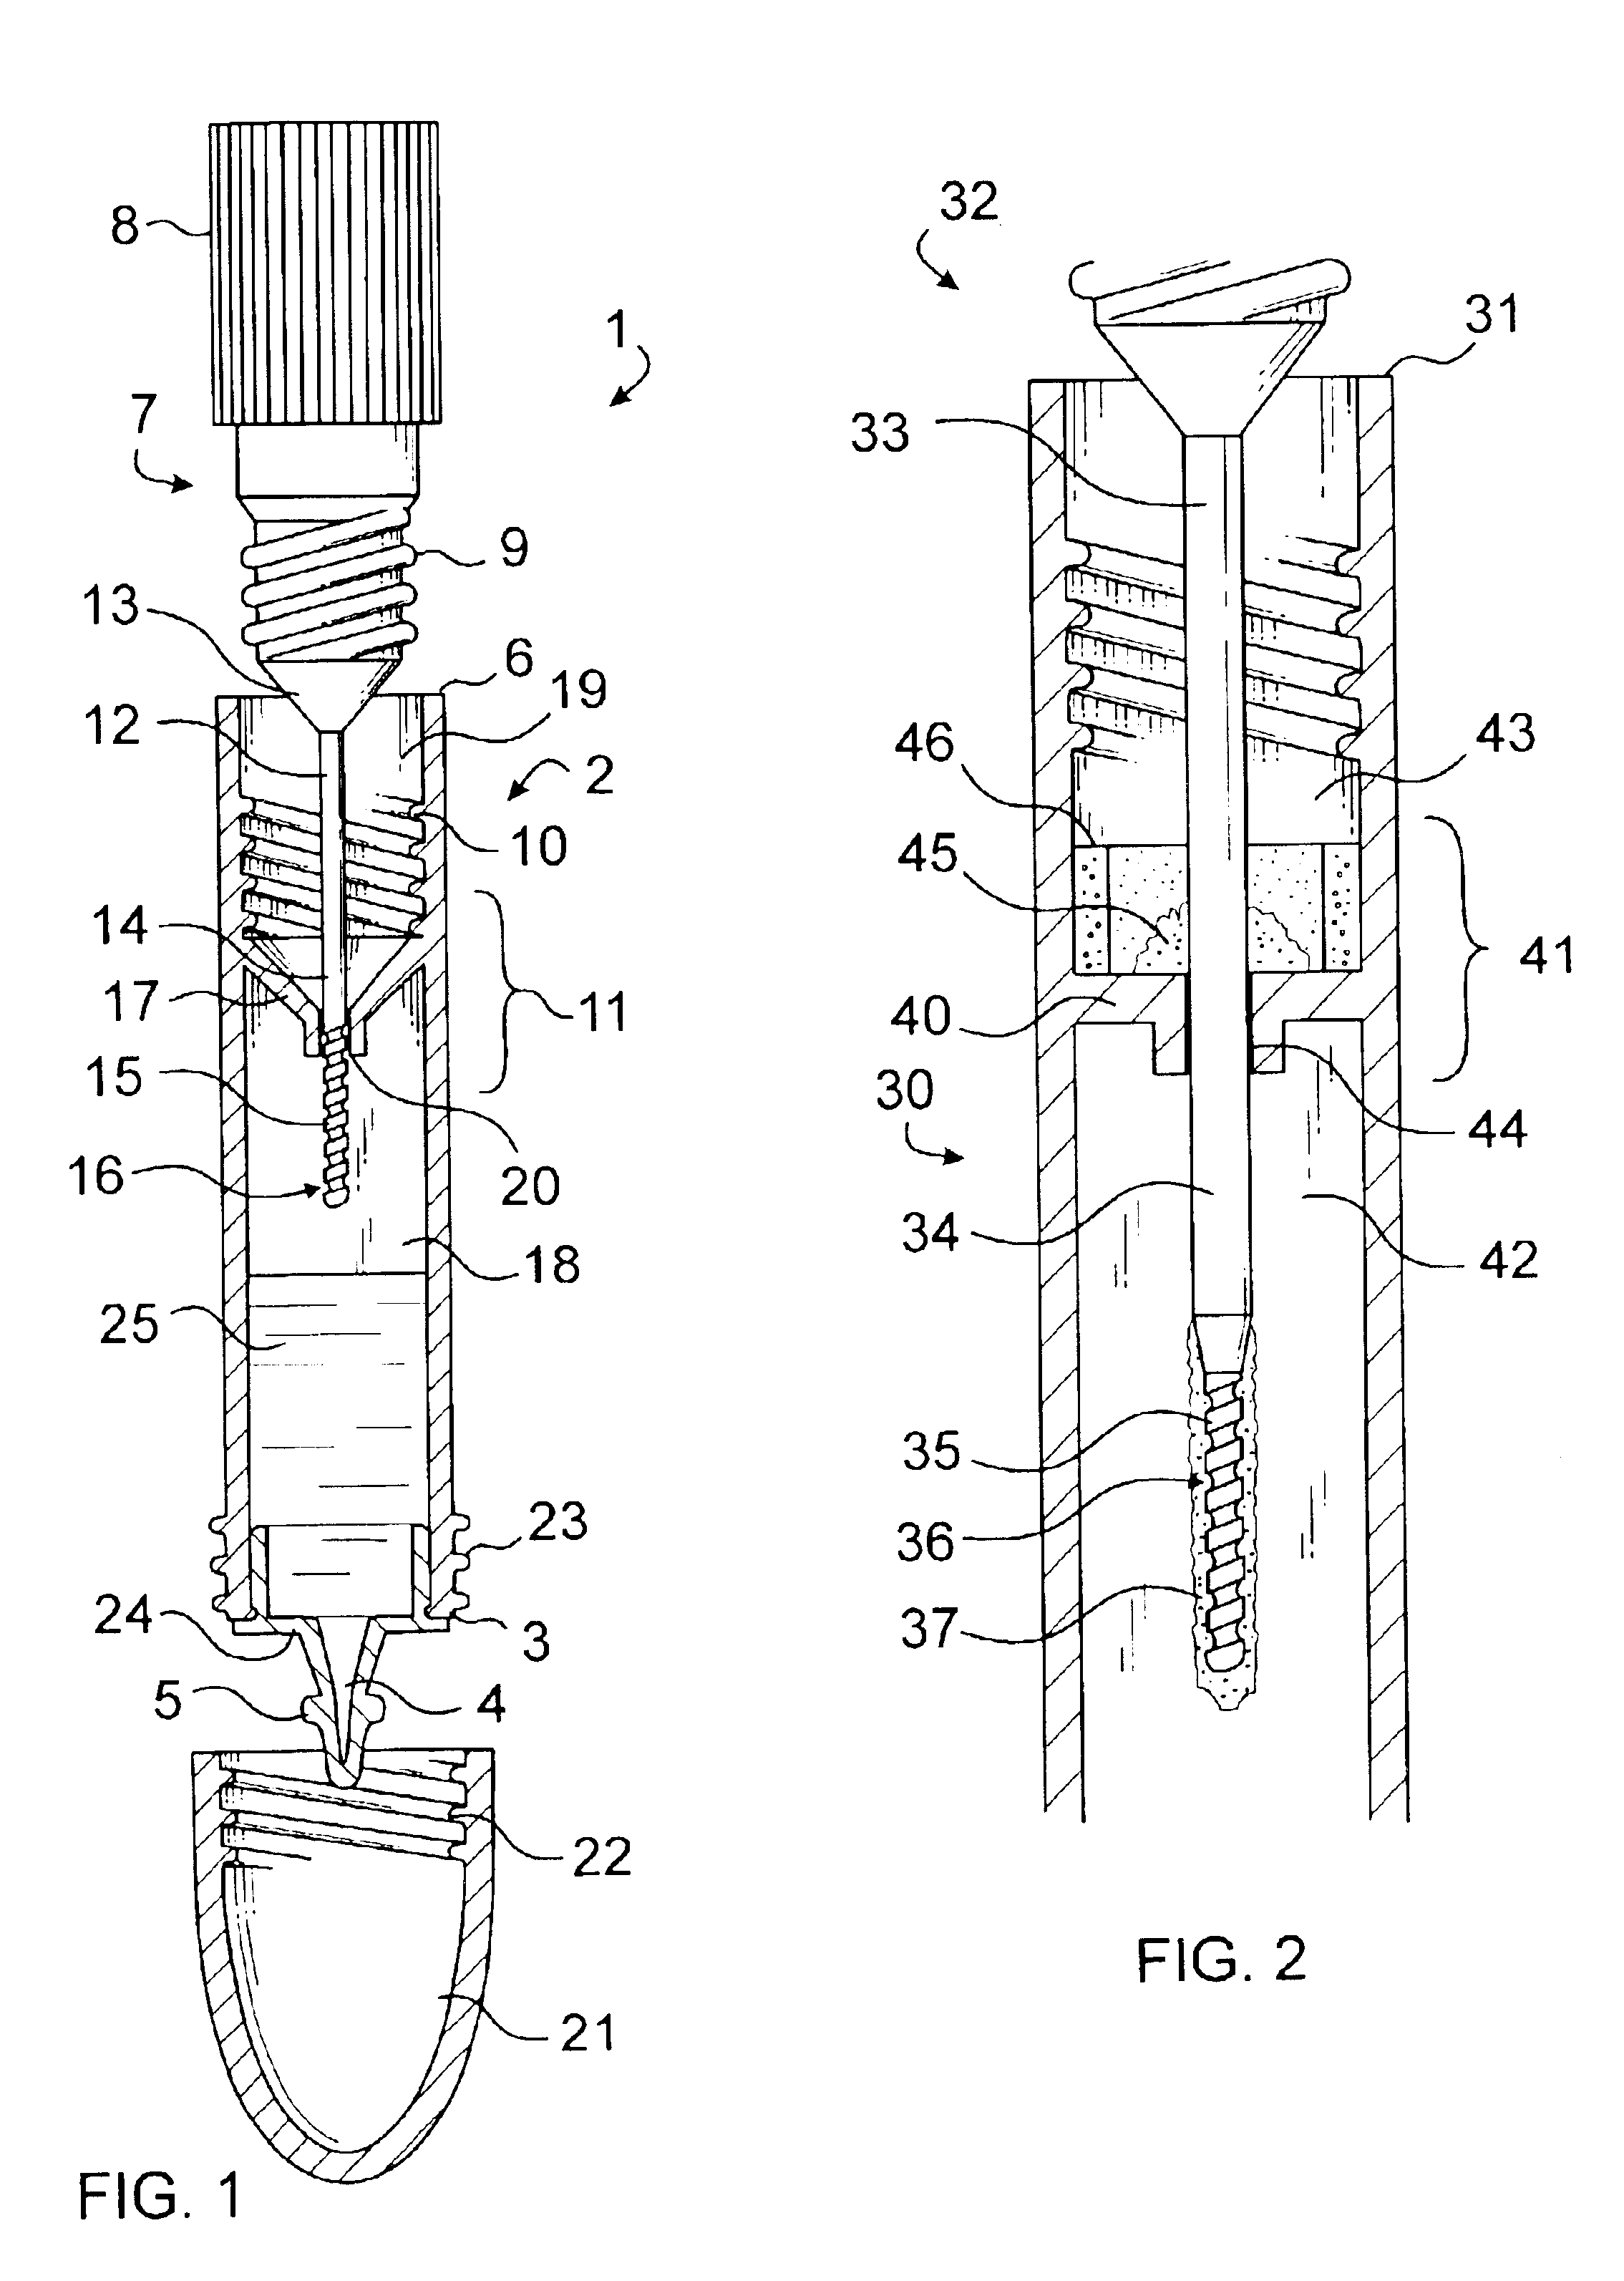 Specimen collection and storage and transport device and method